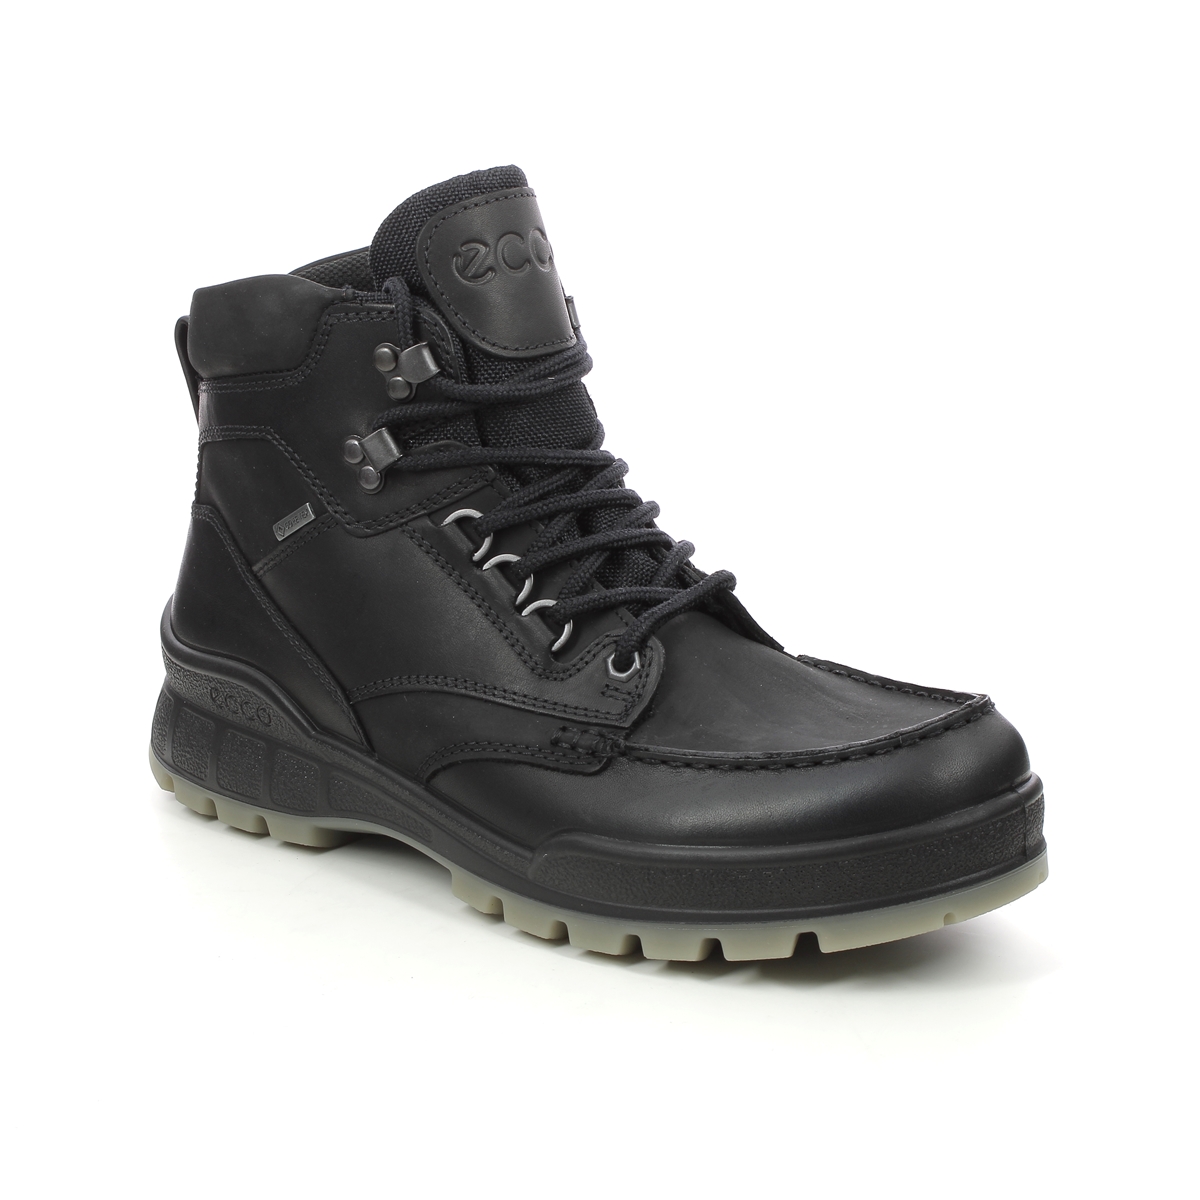 Ecco Track 25 Boot Gtx Black Leather Mens Outdoor Walking Boots 831704-51052 In Size 46 In Plain Black Leather